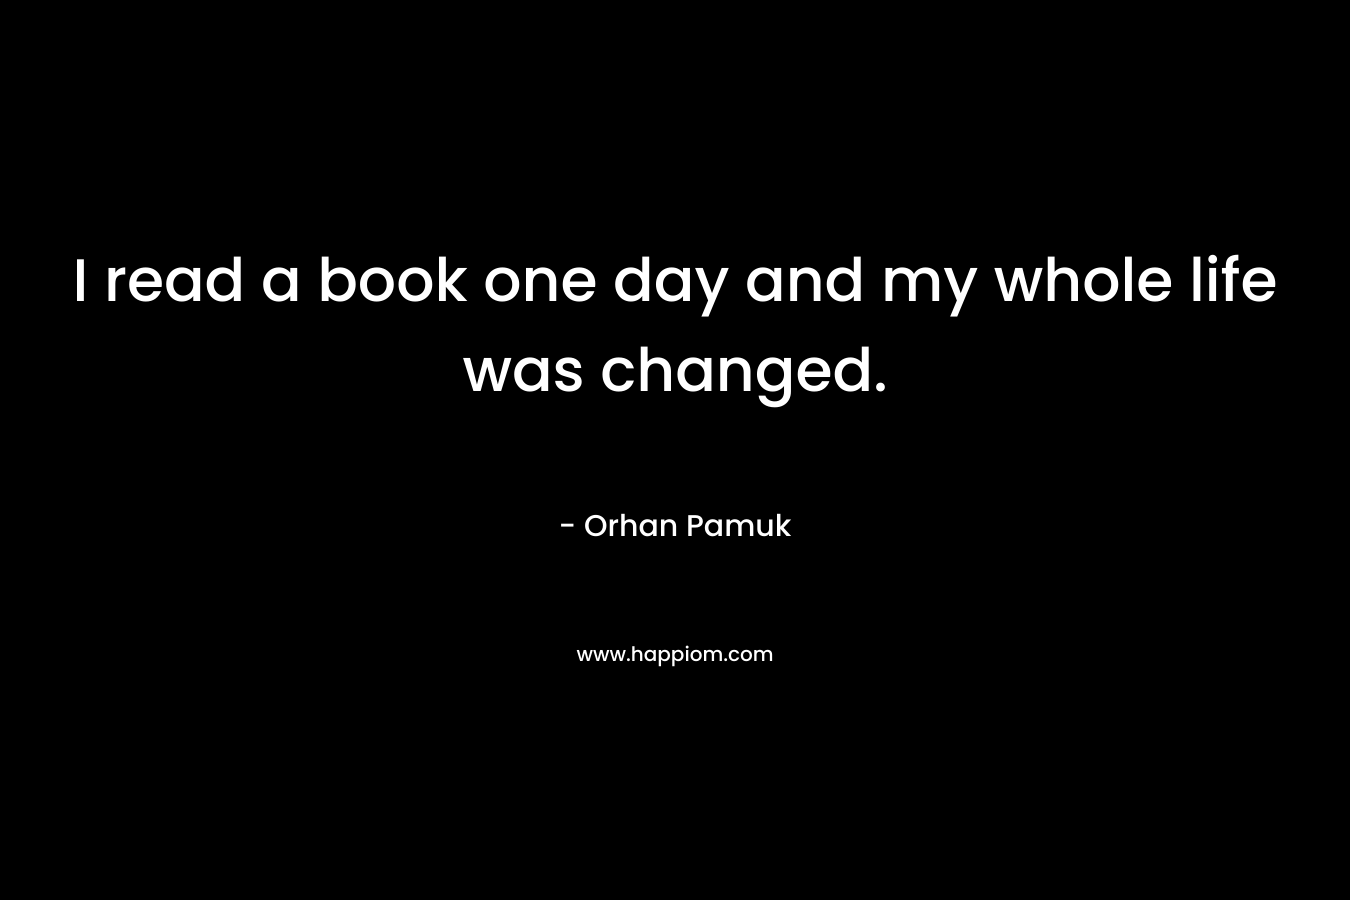 I read a book one day and my whole life was changed. – Orhan Pamuk